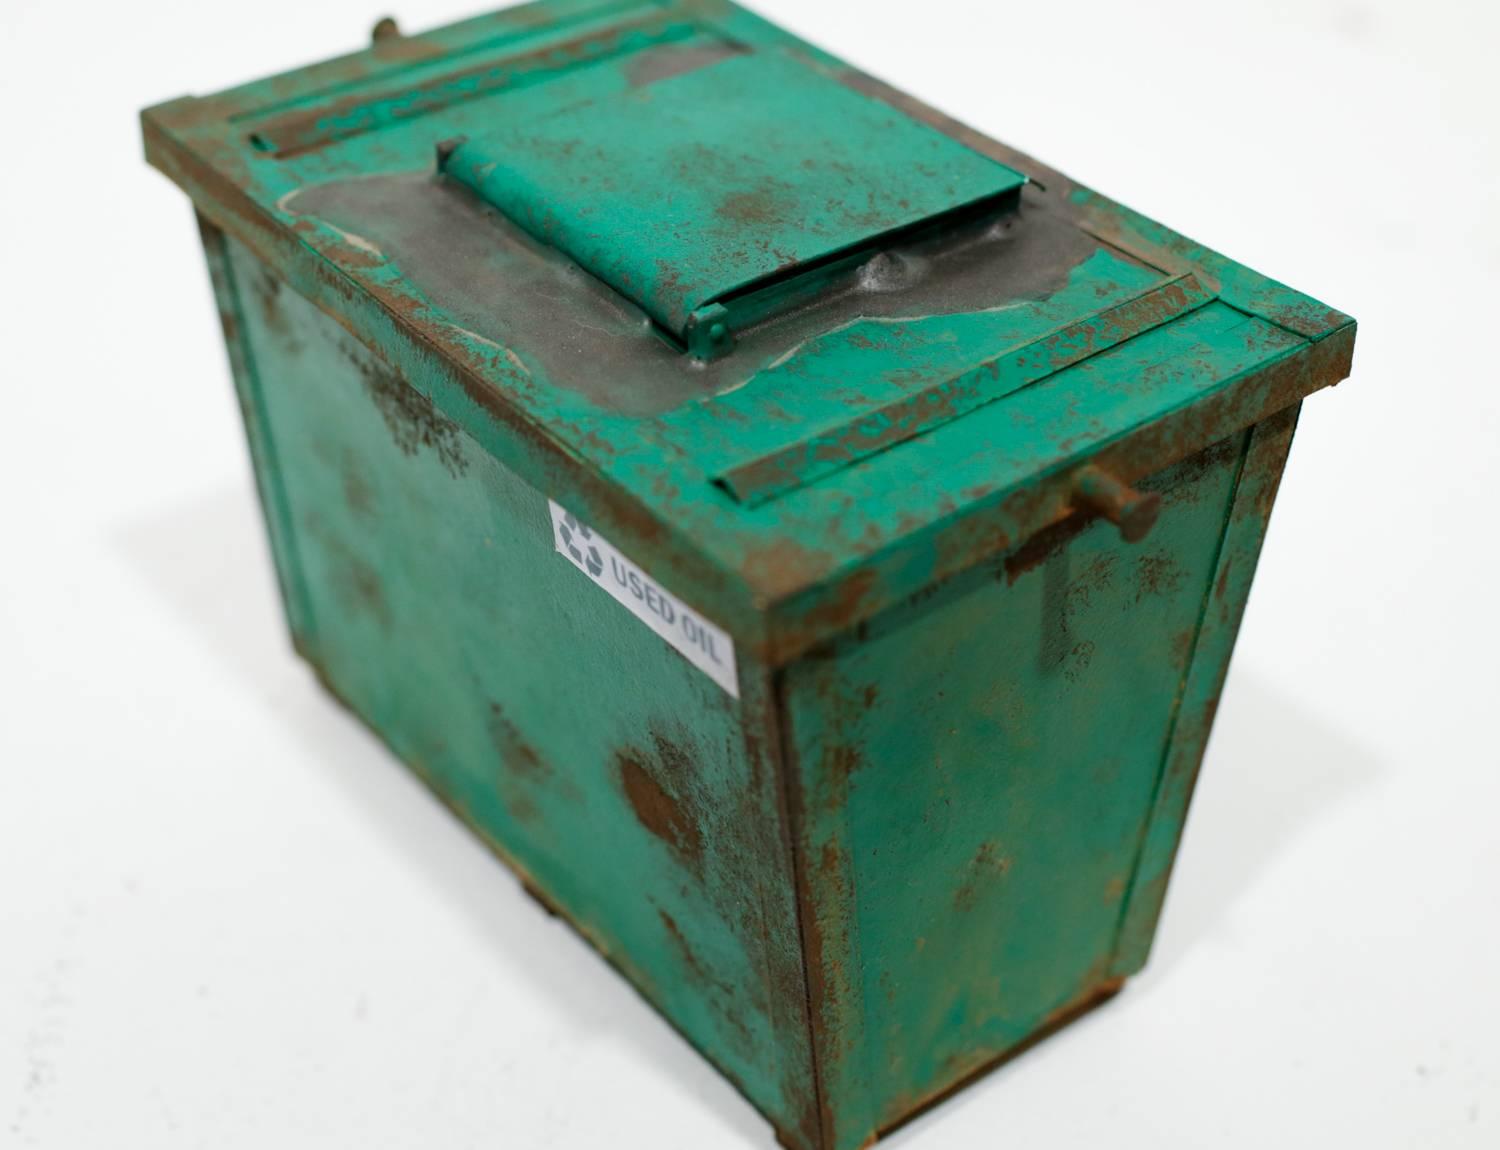 Used Cooking Oil Dumpster - Sculpture by Drew Leshko